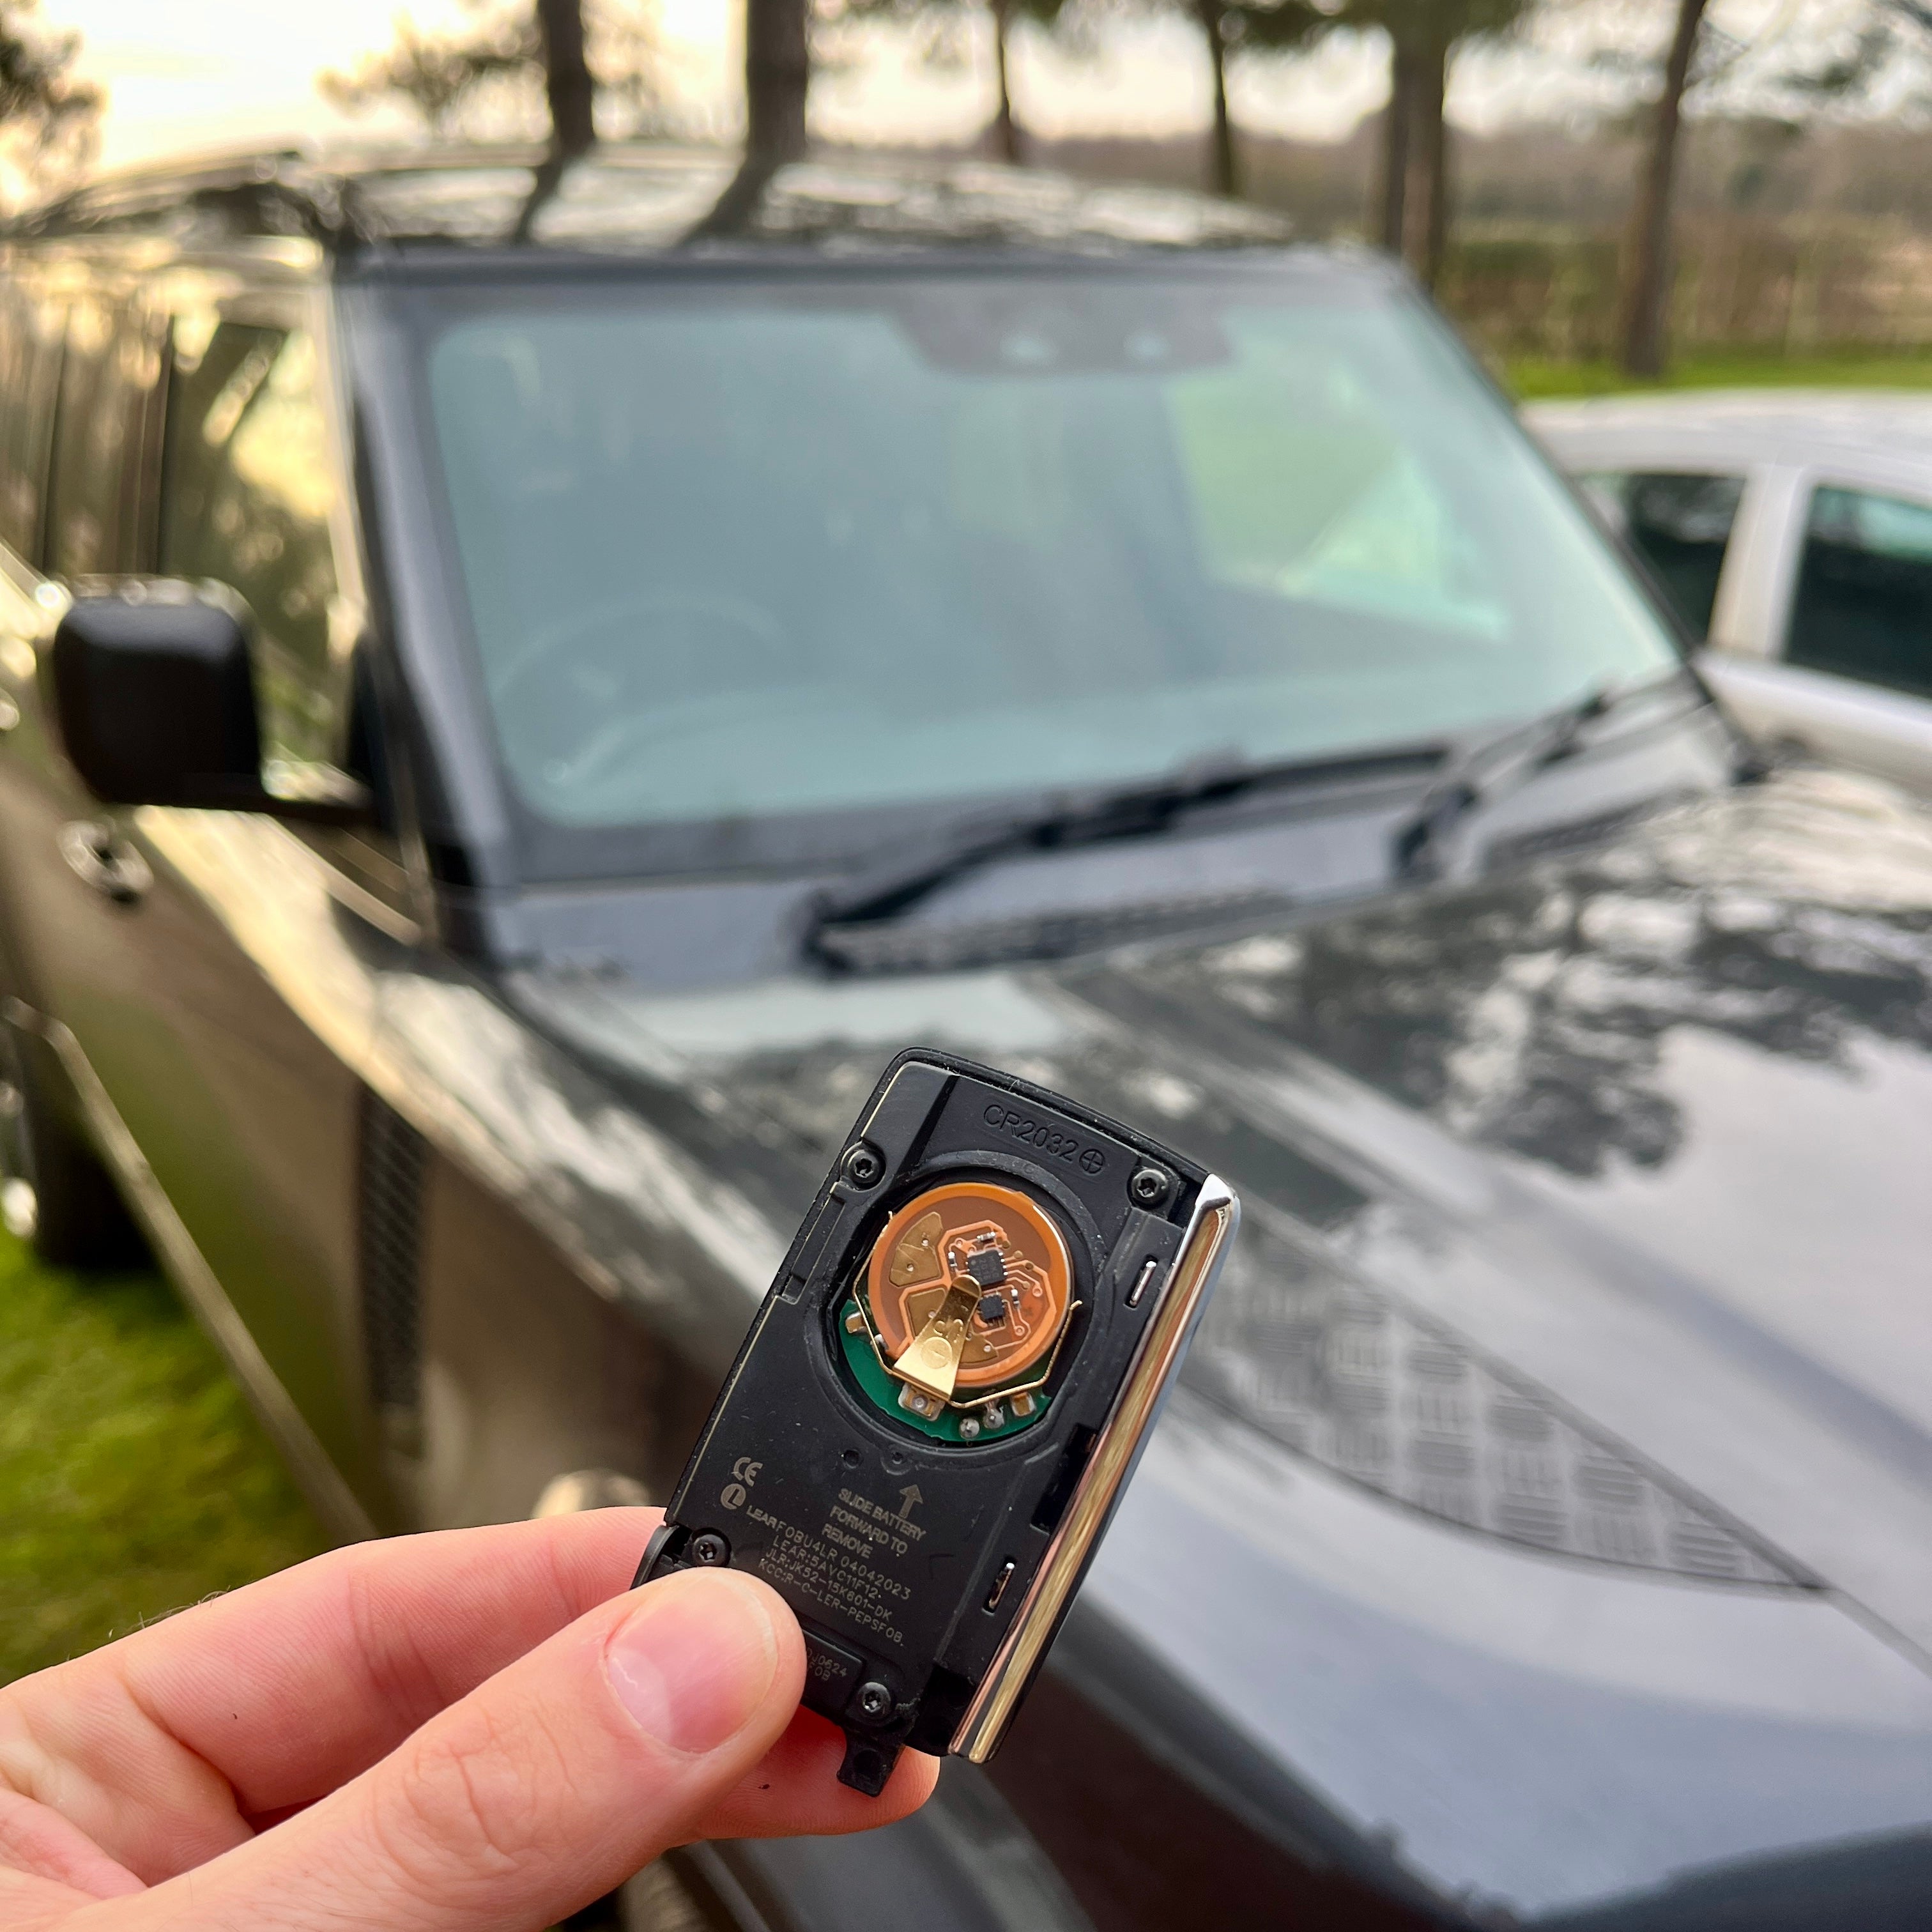 Land Rover Defender car key with KEYSHIELD anti-theft security sleeve installed to prevent stolen car